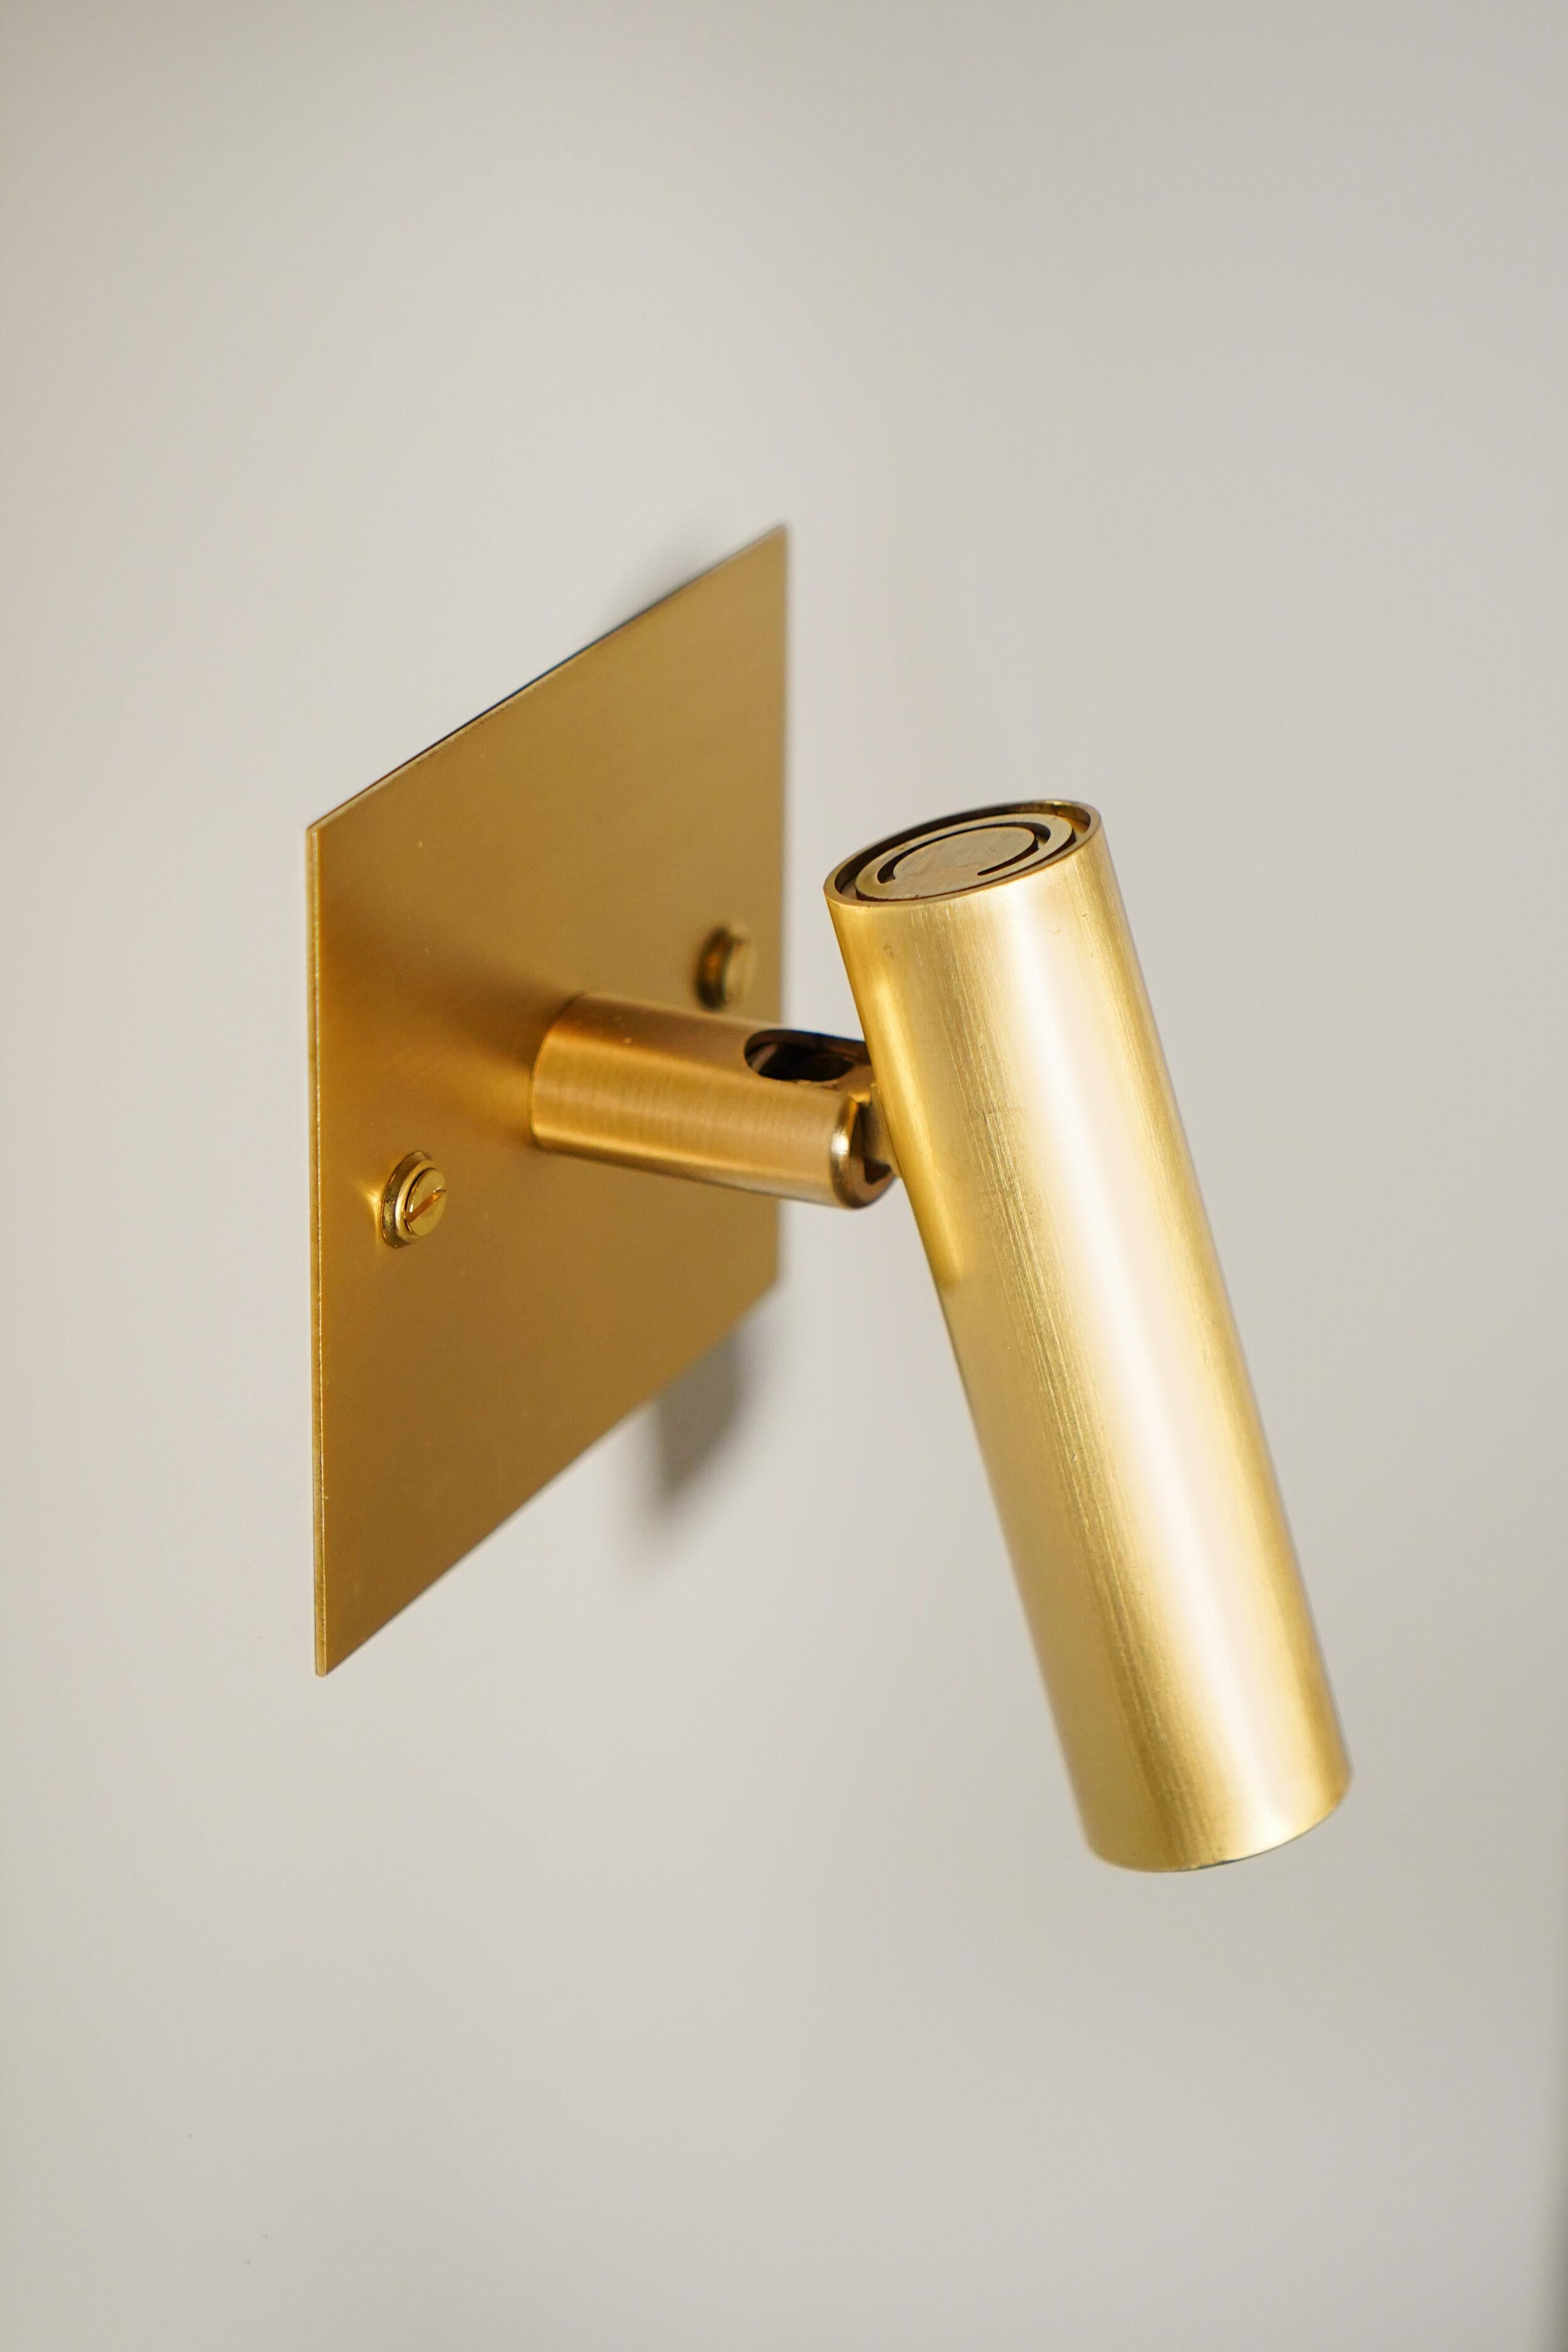 Book wall light by Contain
Dimensions: D 9 x W 12 x H 10 cm 
Materials: Brass.
Available in different finishes.

All our lamps can be wired according to each country. If sold to the USA it will be wired for the USA for instance.

“You are